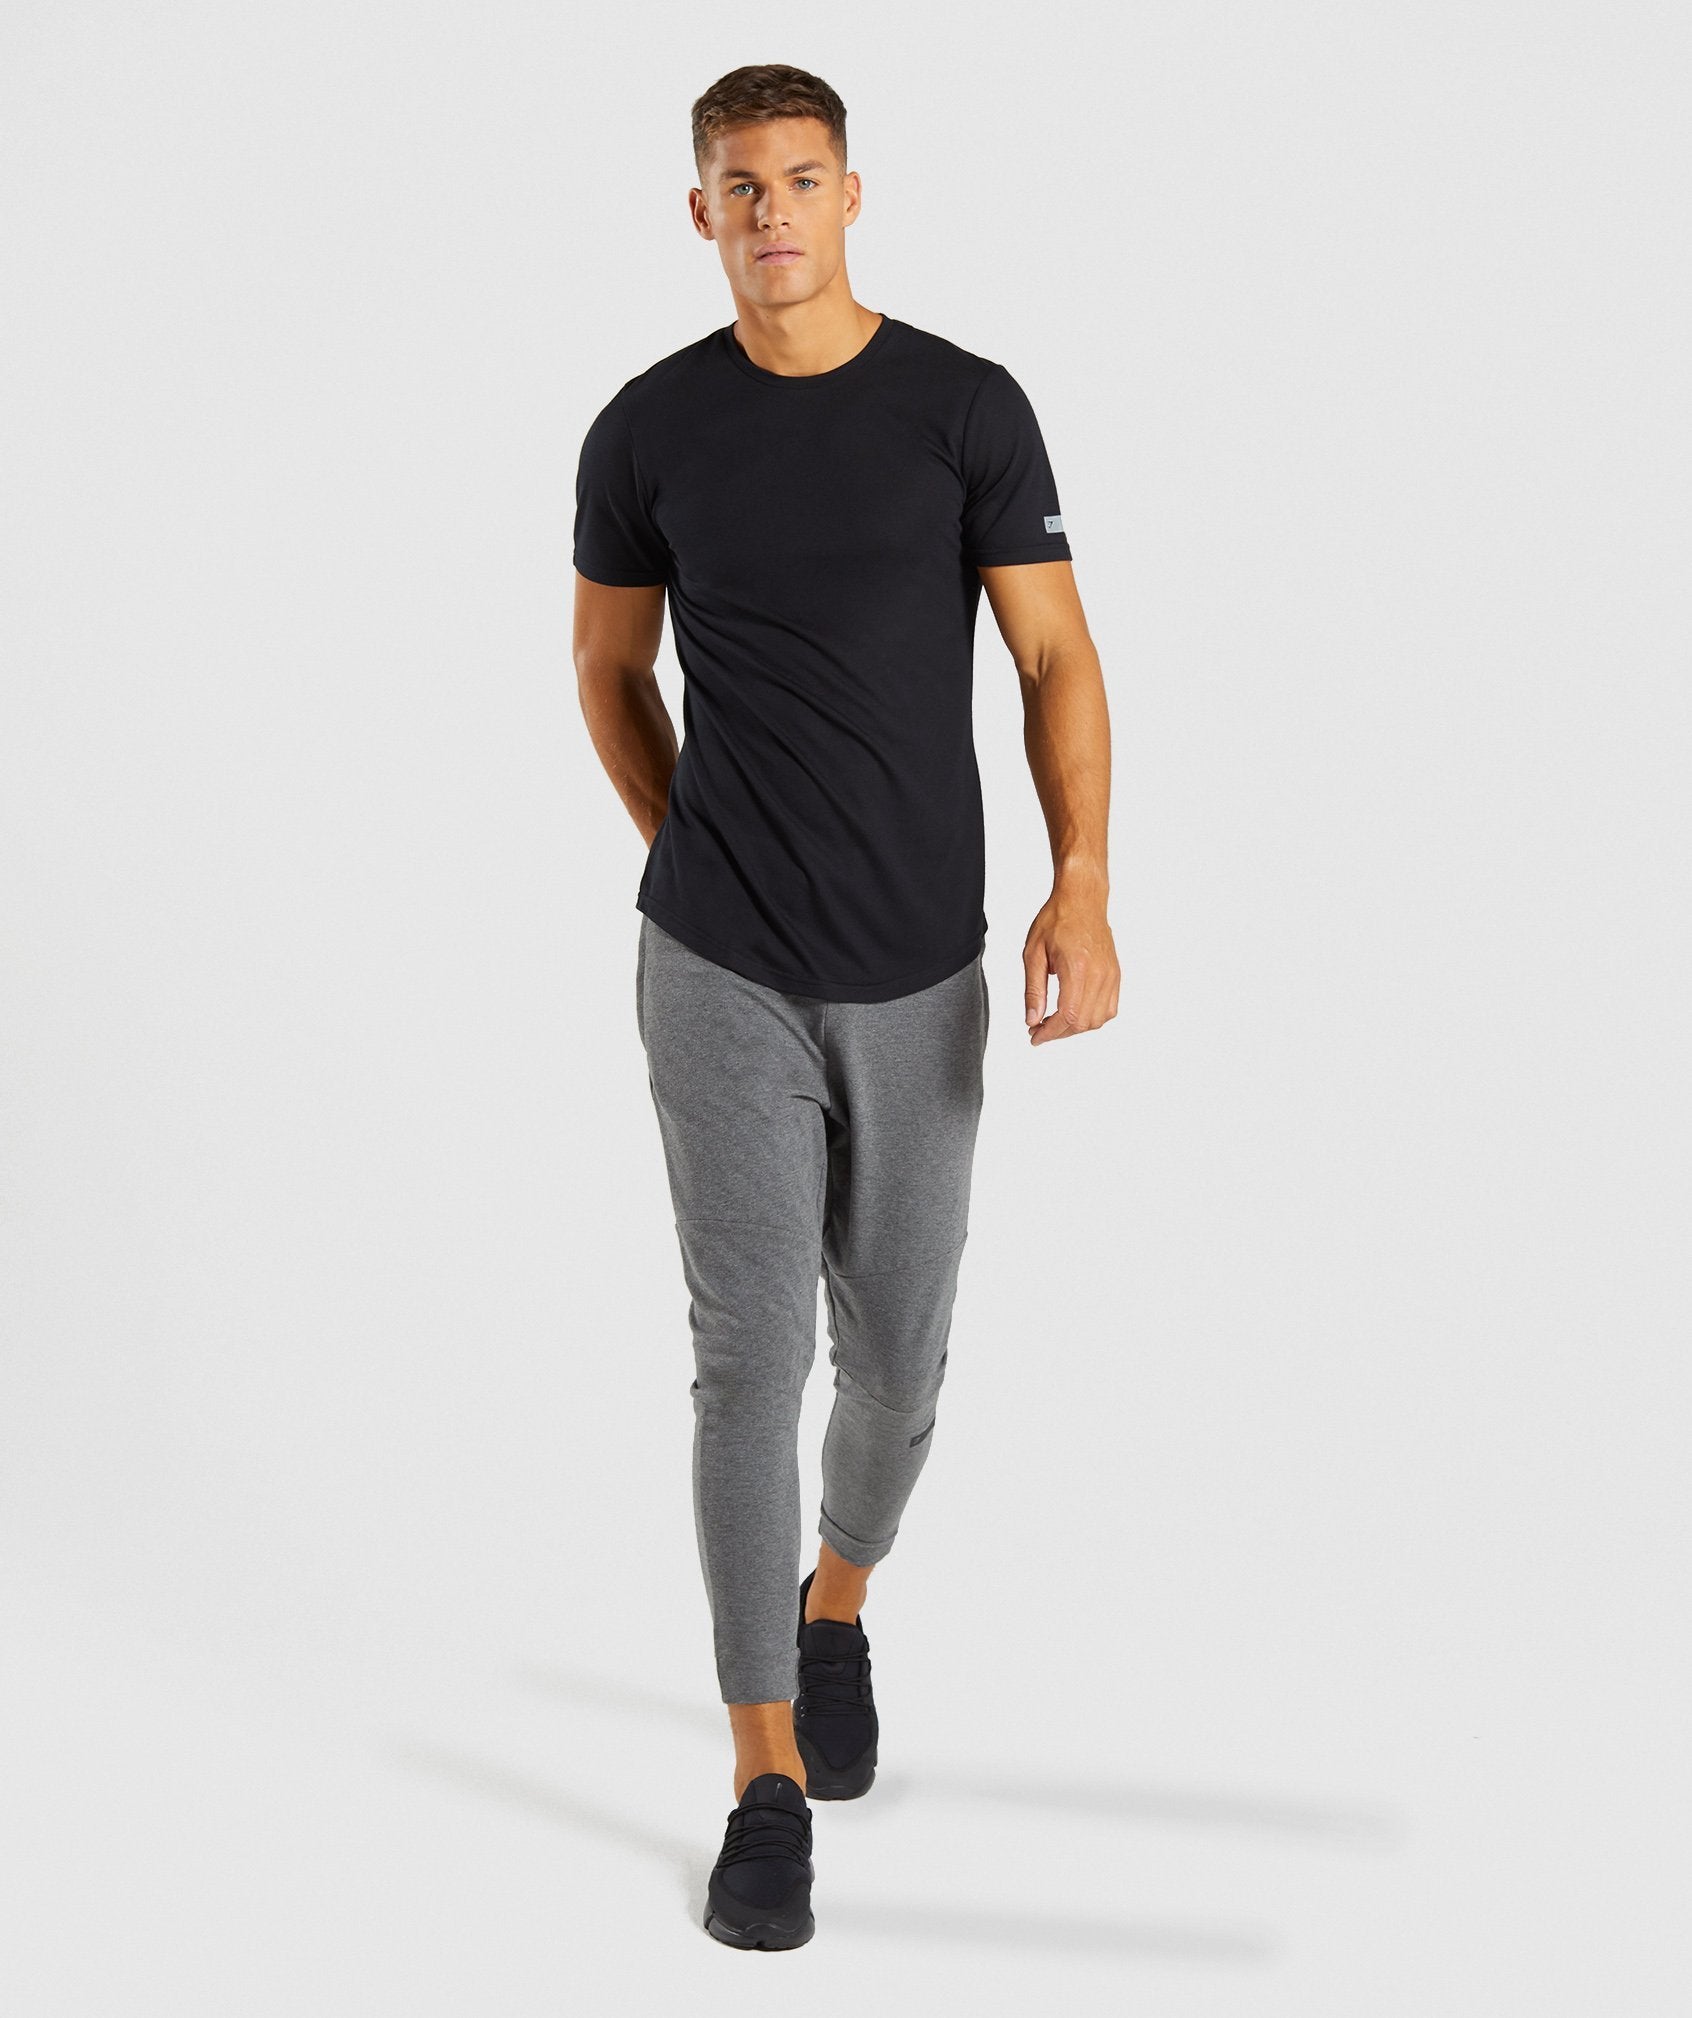 Perforated Longline T-Shirt in Black - view 6